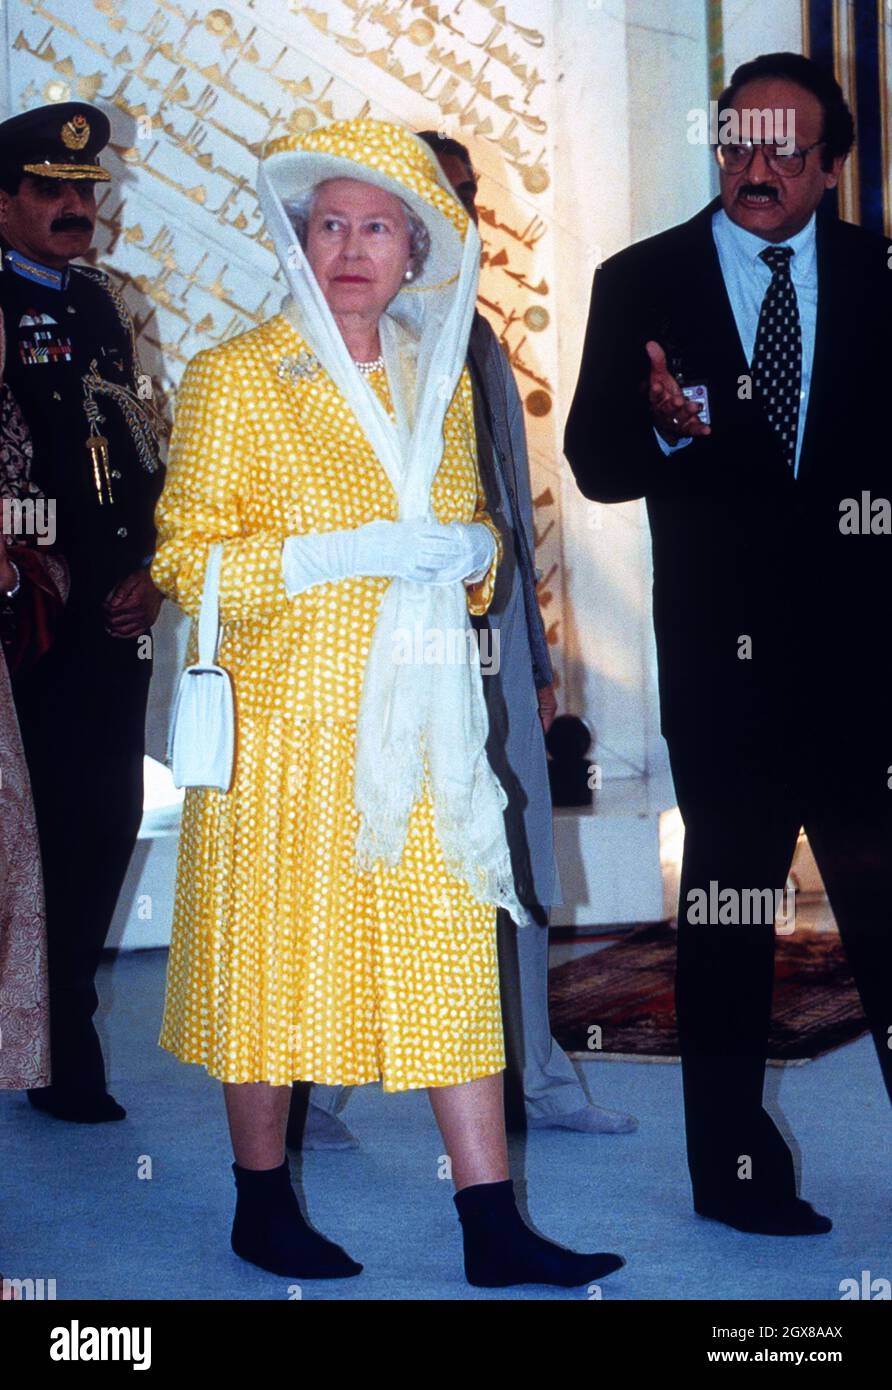 The Queen in her socks tours the Shah Faisal Mosque in Islamabad on her official visit to Pakistan. Stock Photo